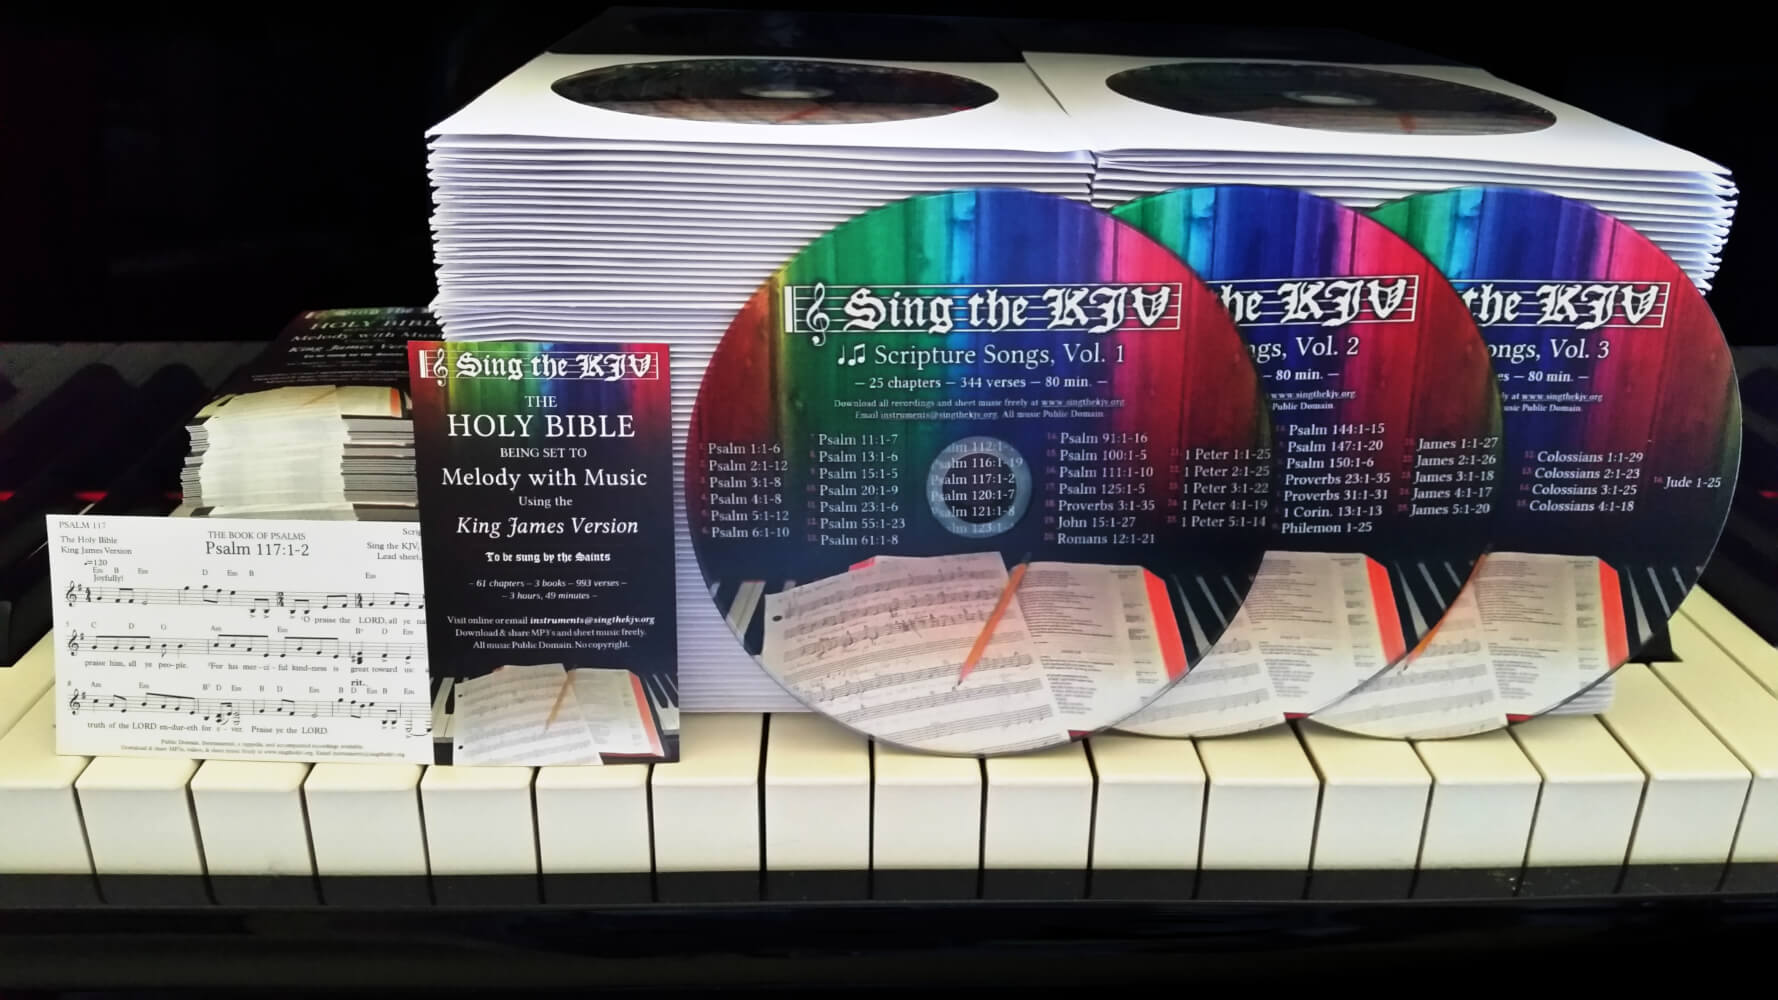 Sing the KJV CDs and business cards